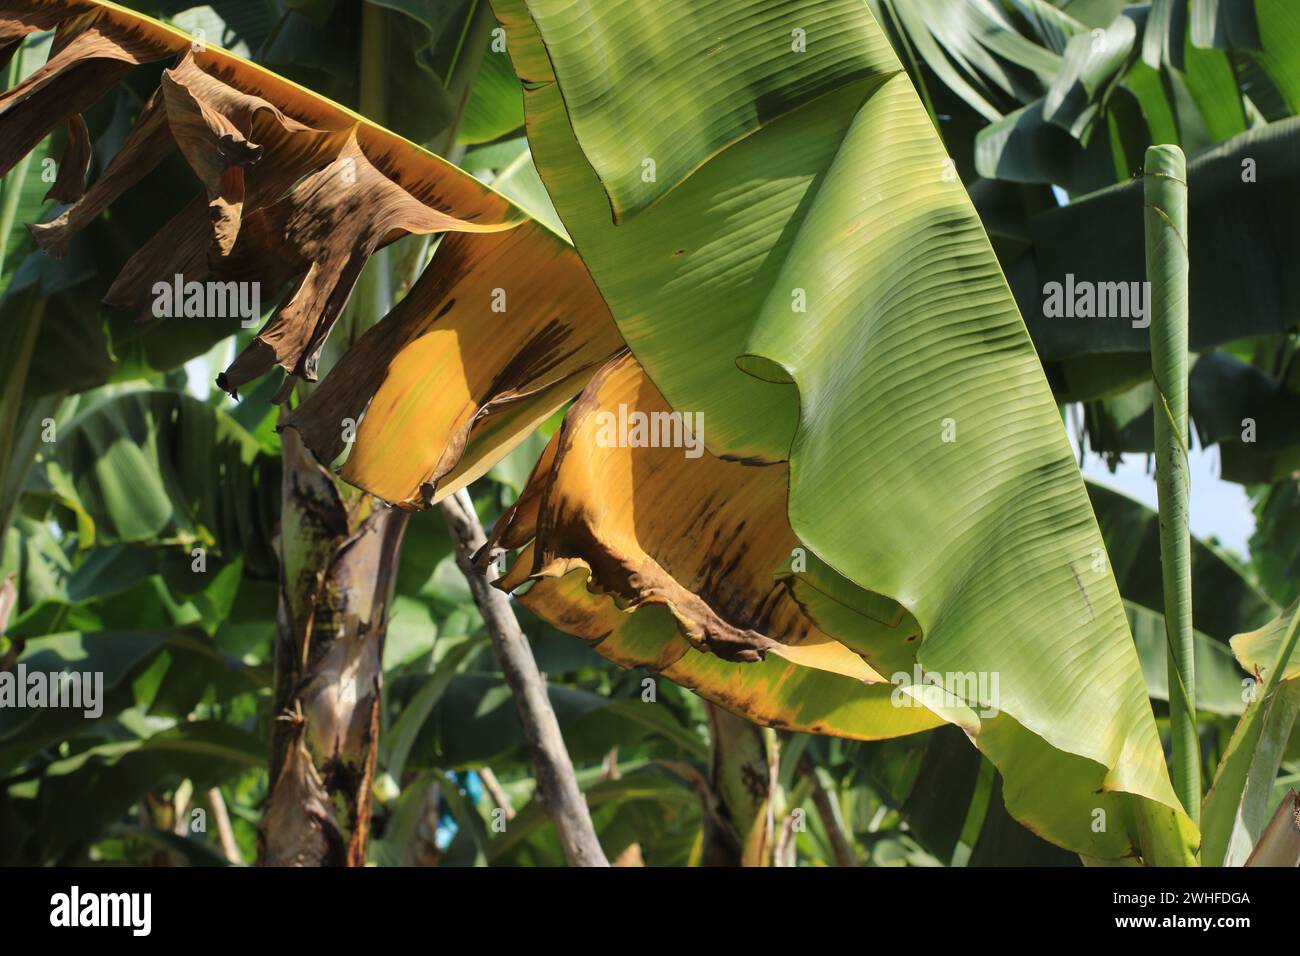 banana plant heavily affected by deadly Fusarium wilt disease Tropical Race 4 fungus Stock Photo